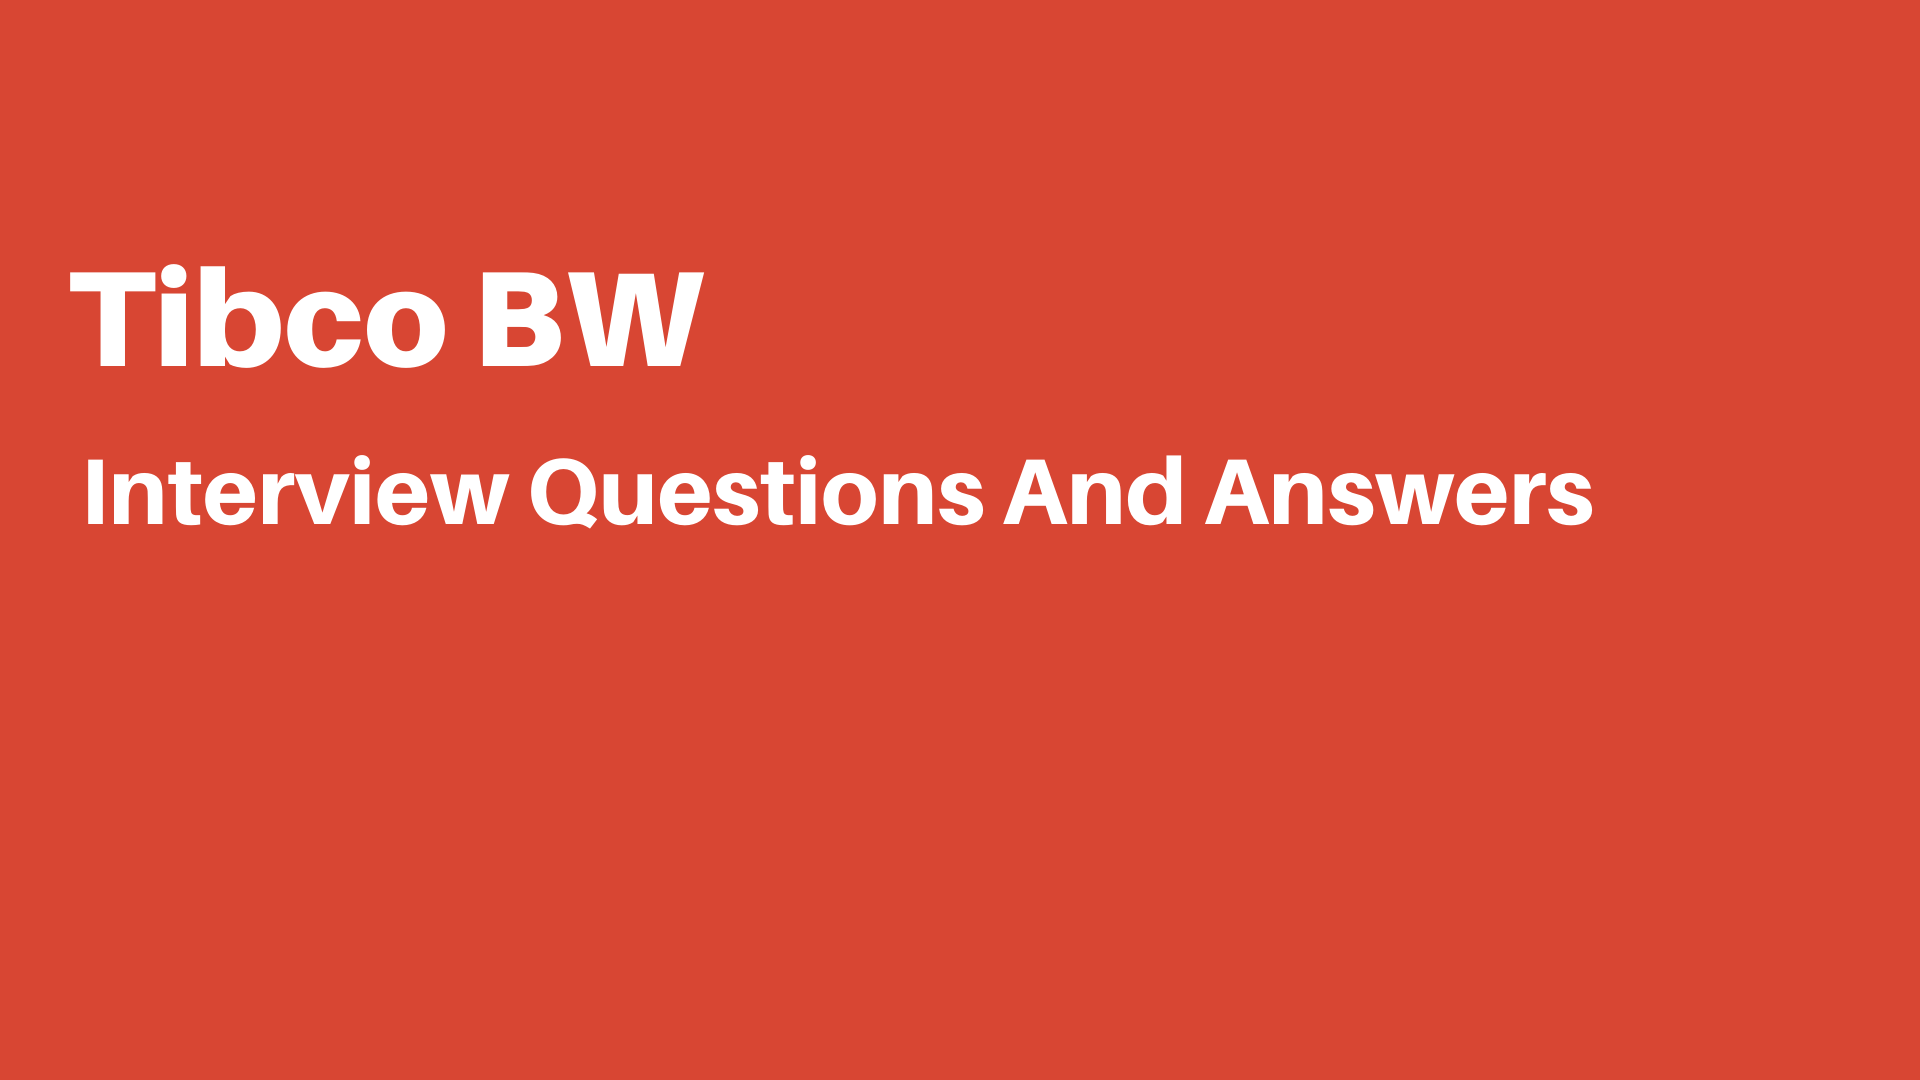 Tibco BW Interview Questions